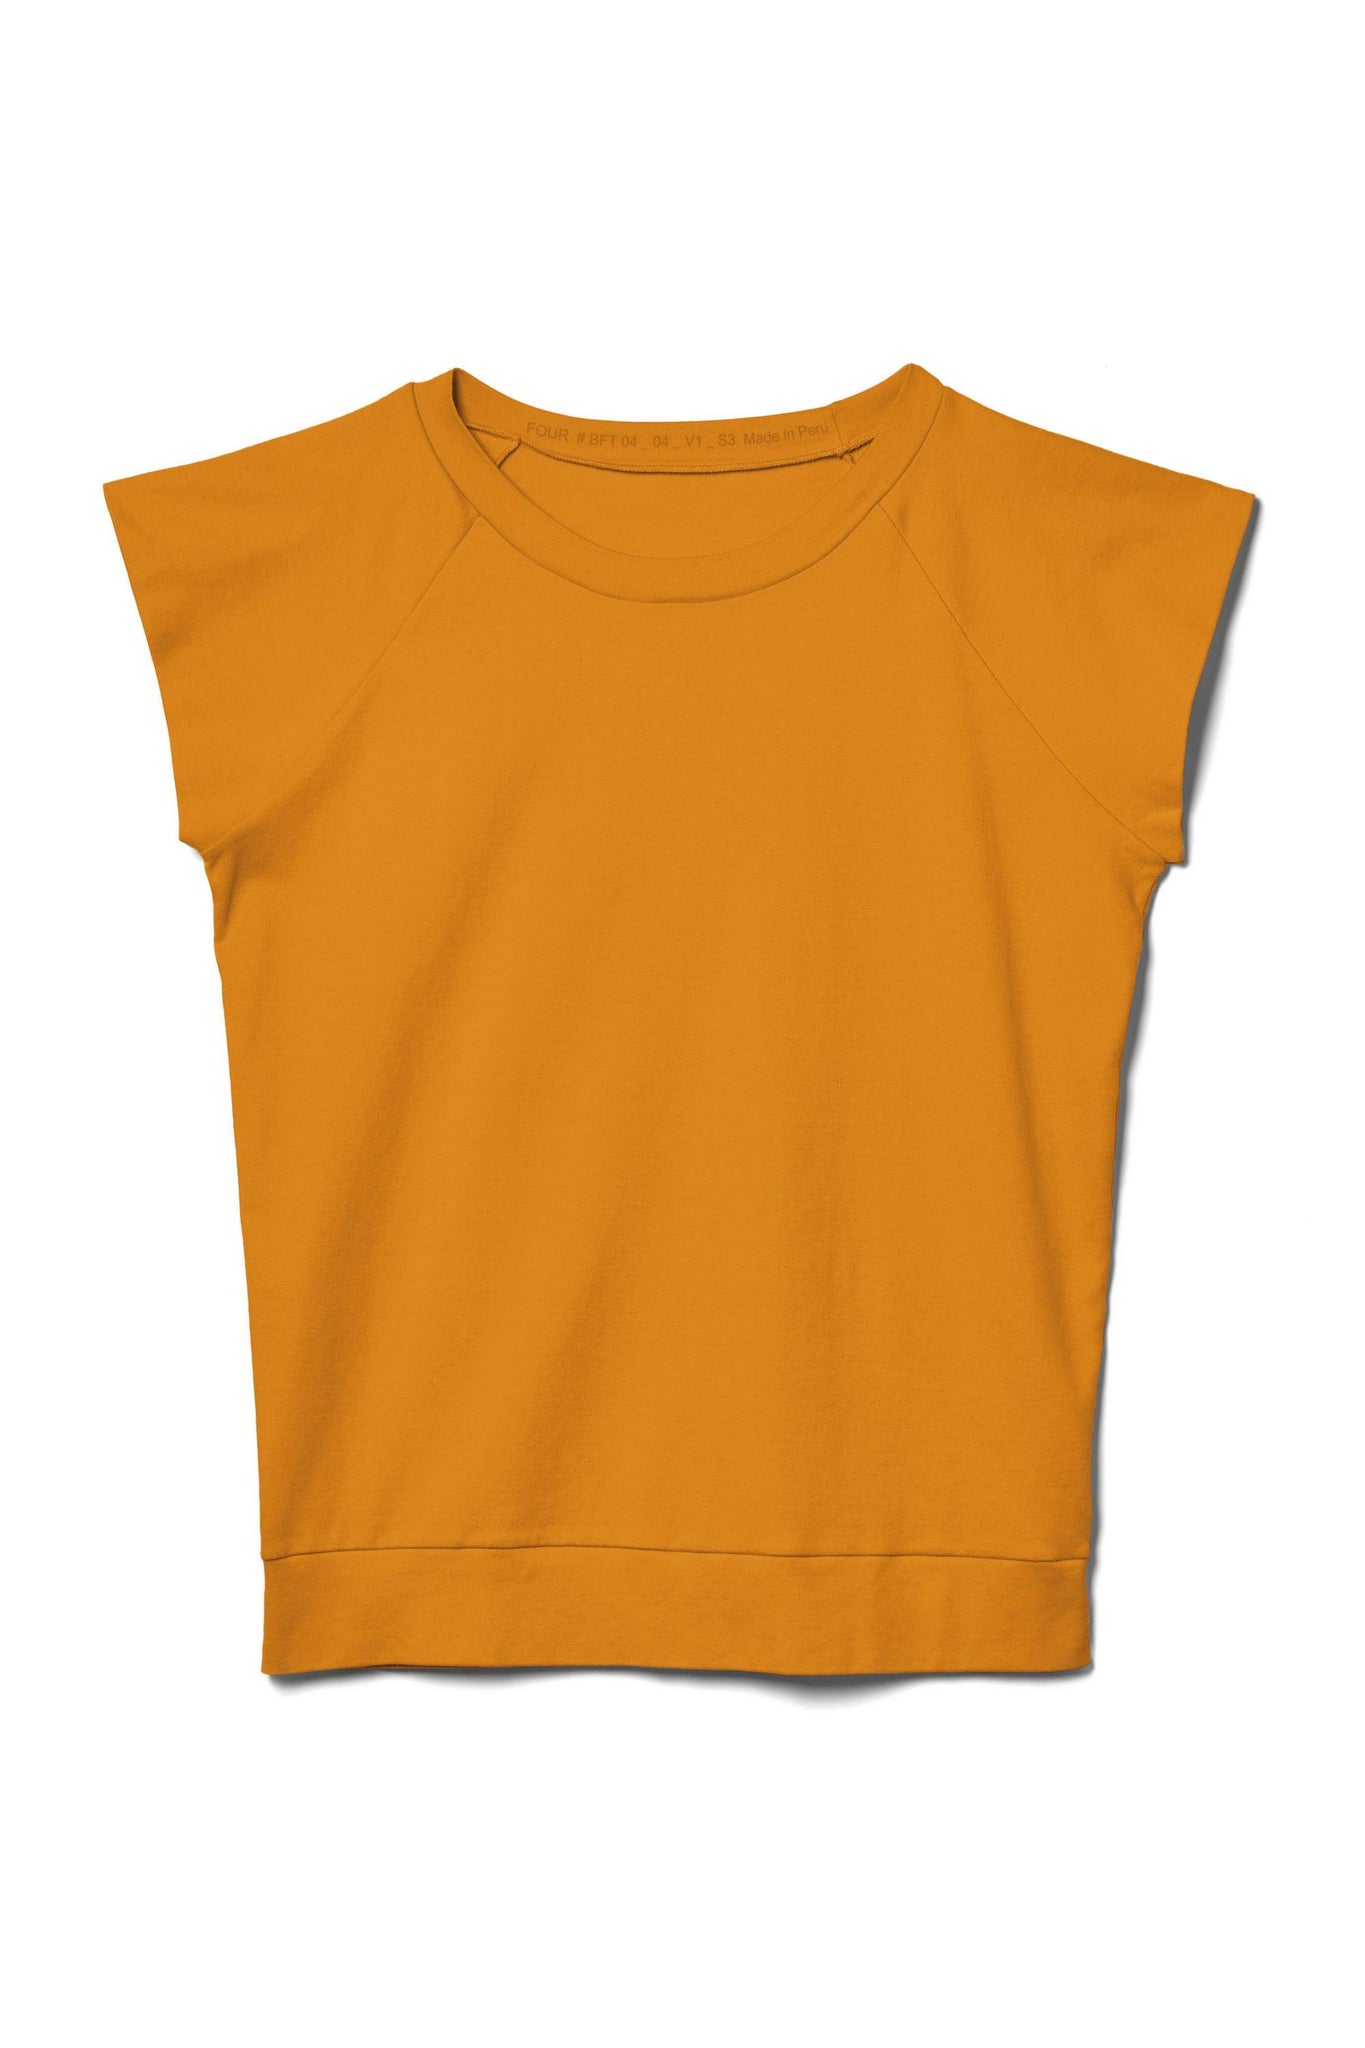 BFT Organic Cotton Onion Skin by 4 in #BFtee